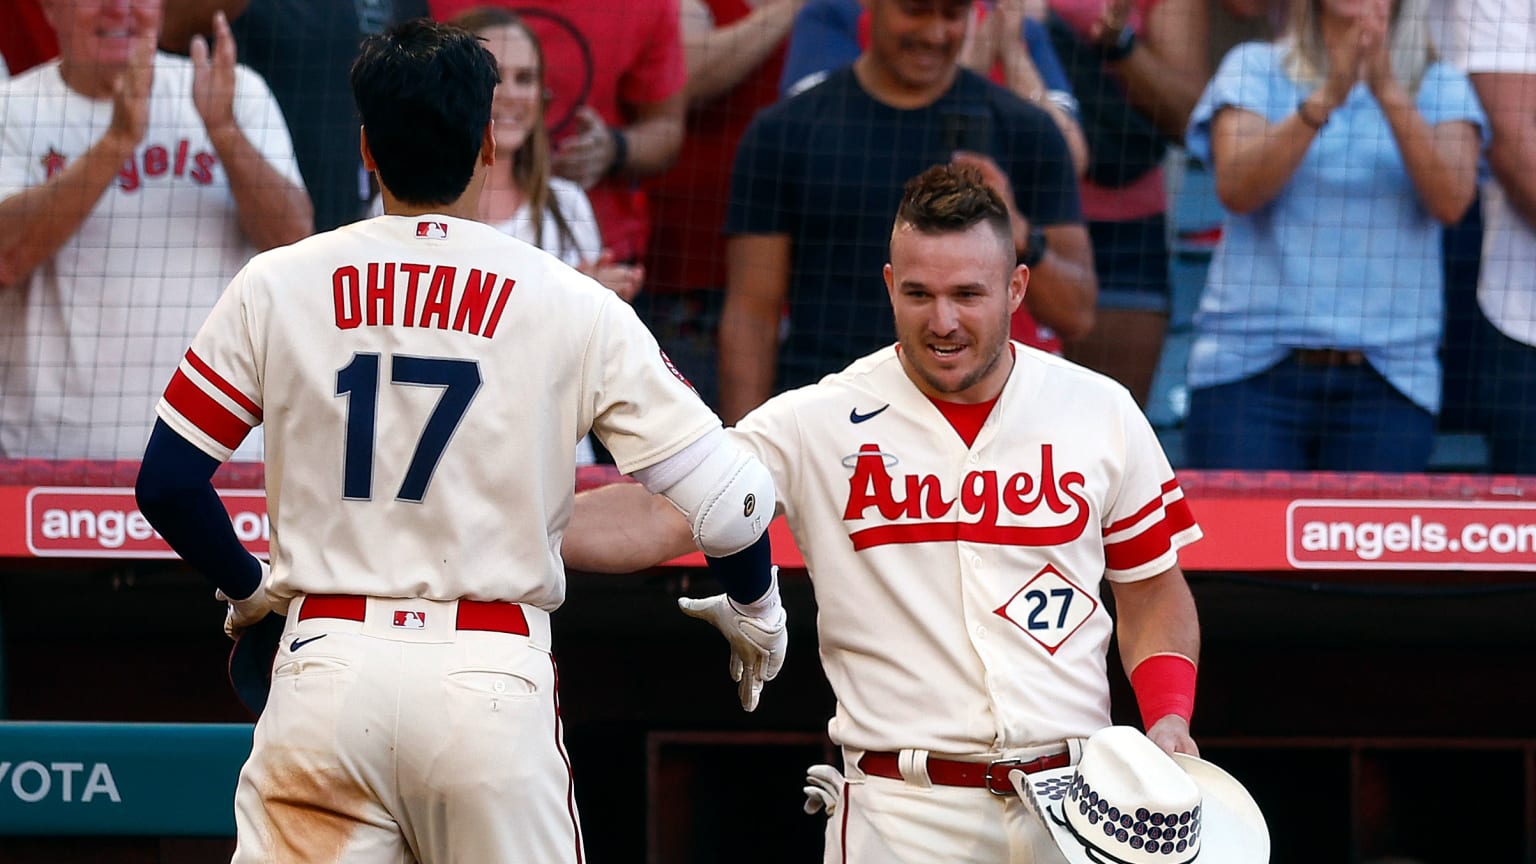 Mike Trout greets Shohei Ohtani in the dugout